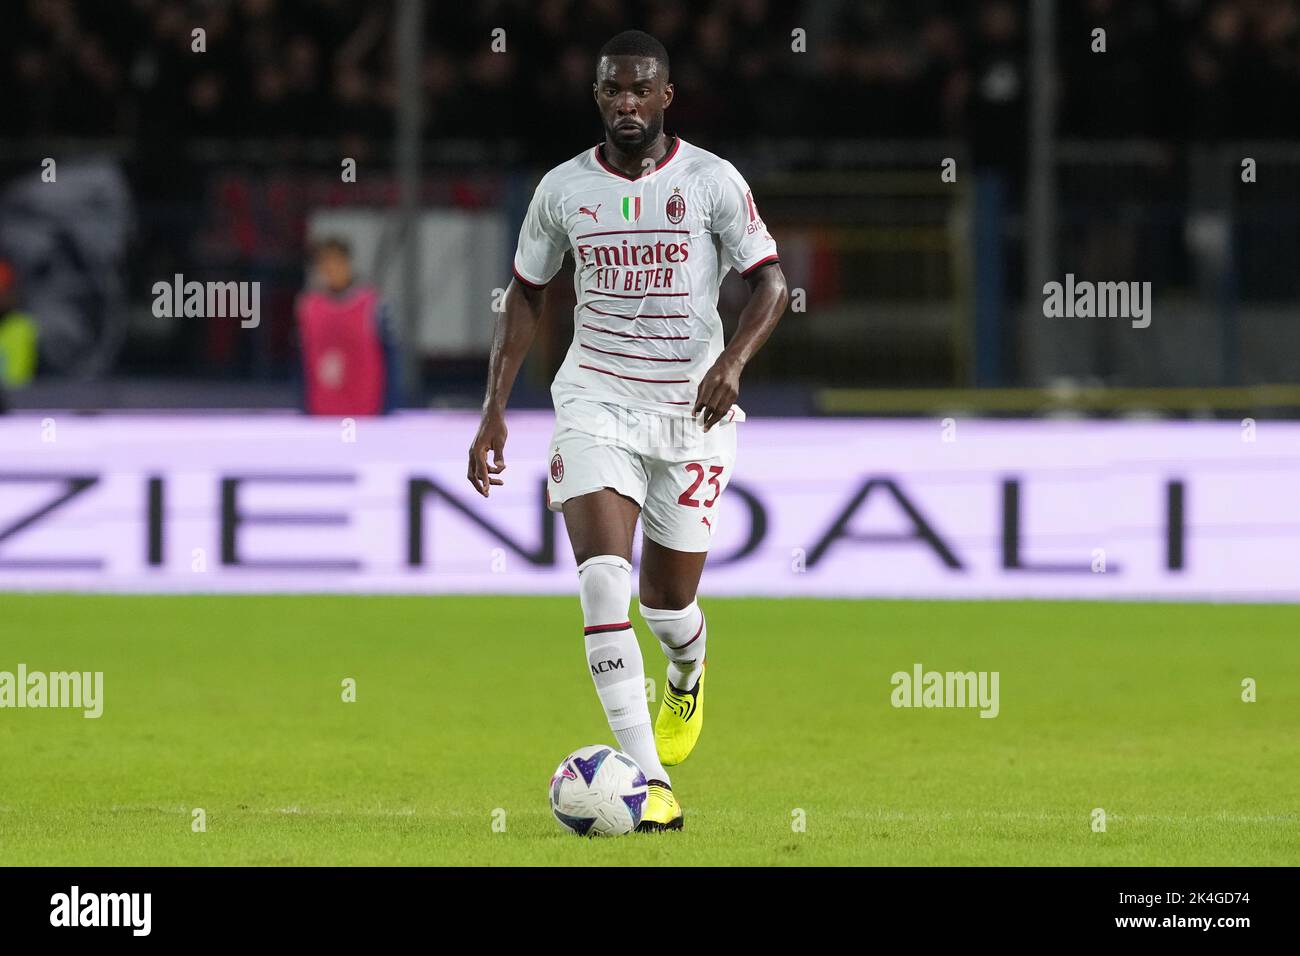 Empoli, Italy. 01st Oct, 2022. Fikayo Tomori of AC Milan during the Serie A 2022/2023 football match between Empoli and AC Milan at Castellani stadium in Empoli (Italy), October 1st, 2022. Photo Paolo Nucci/Insidefoto Credit: Insidefoto di andrea staccioli/Alamy Live News Stock Photo